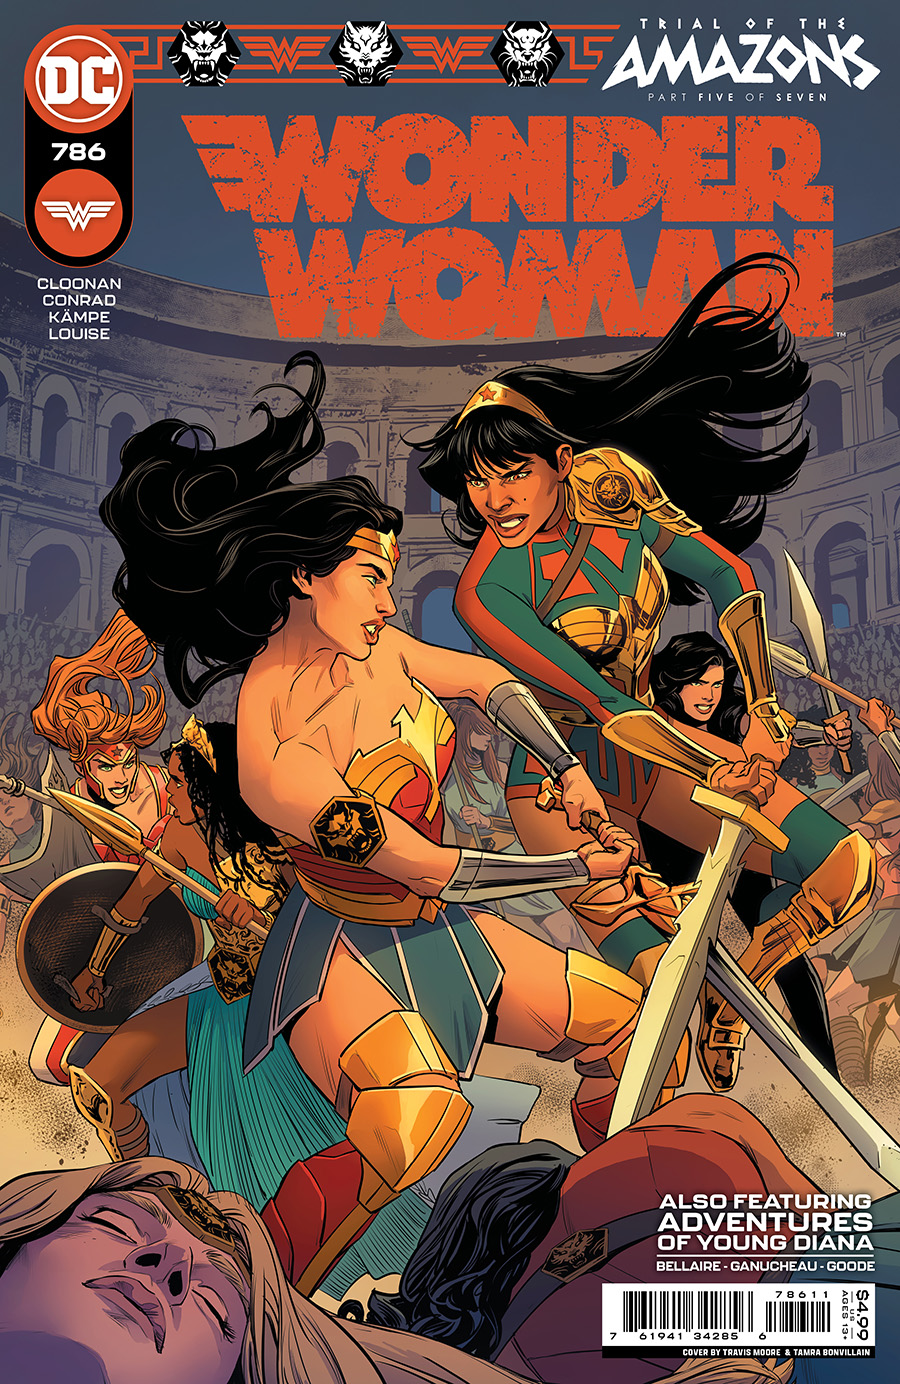 Wonder Woman Vol 5 #786 Cover A Regular Travis Moore Cover (Trial Of The Amazons Part 5)